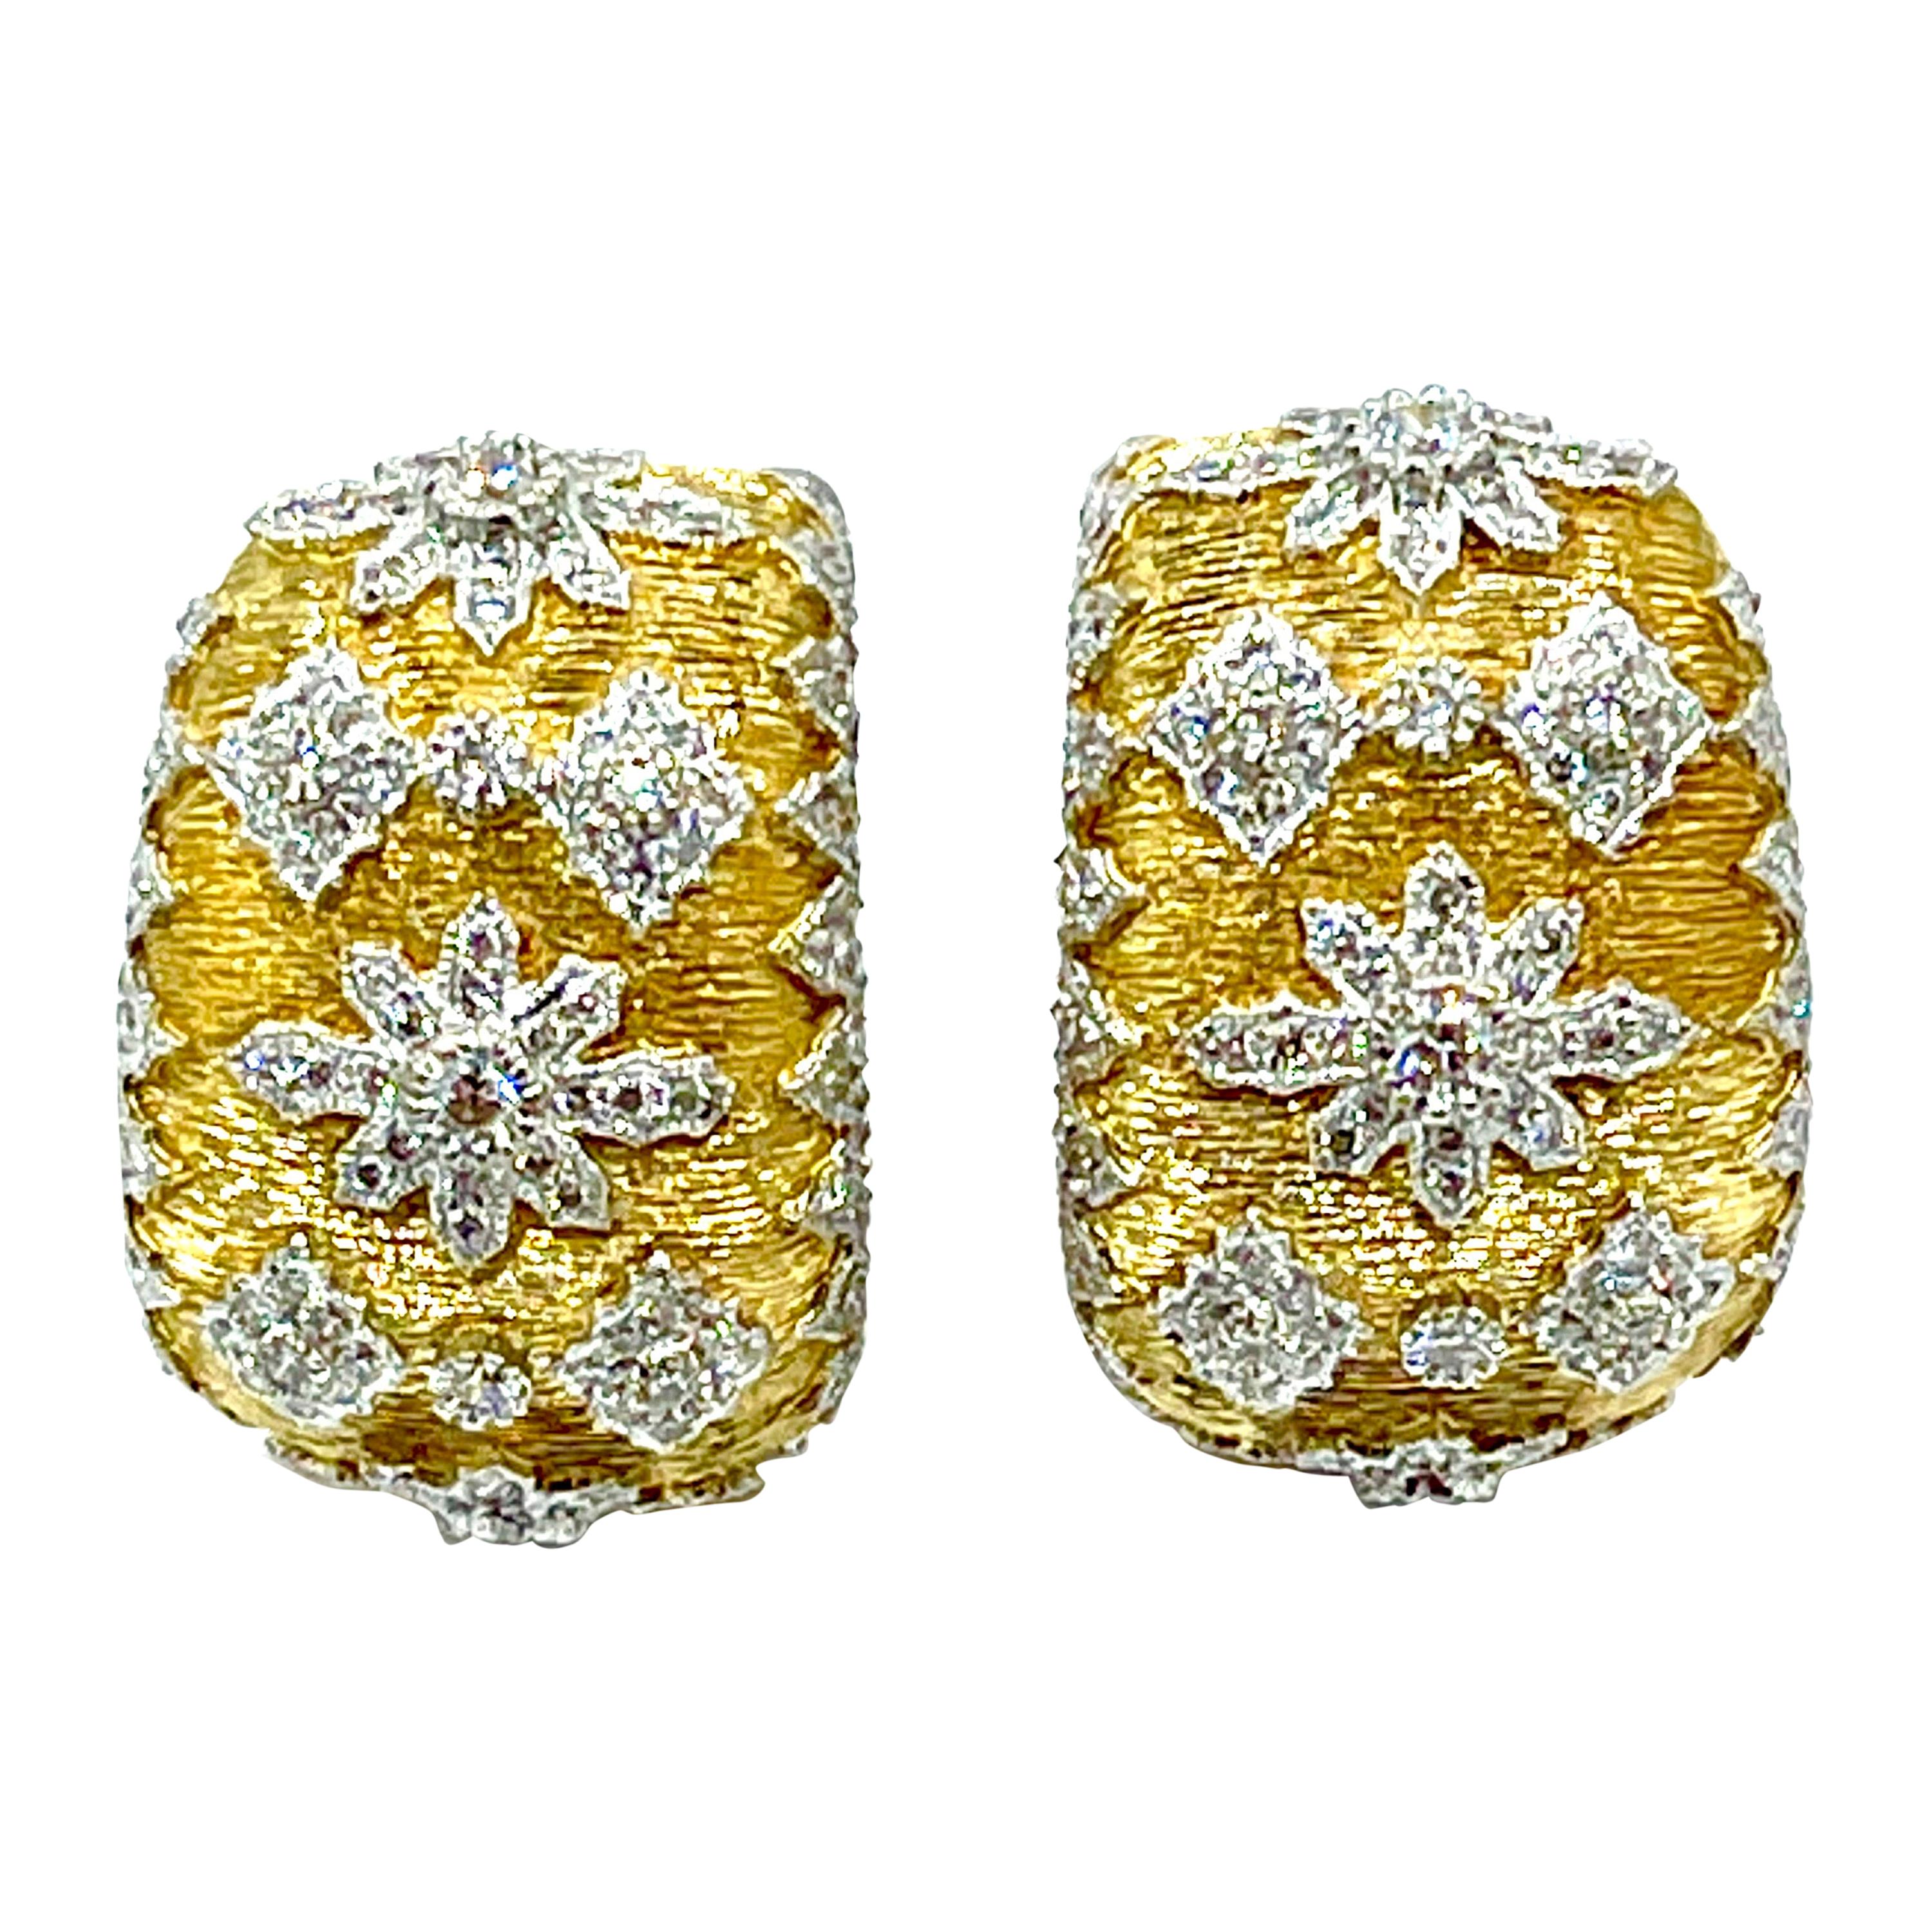 1.71 Carat Diamond and 18 Karat White and Yellow Gold Clip and Post Earrings